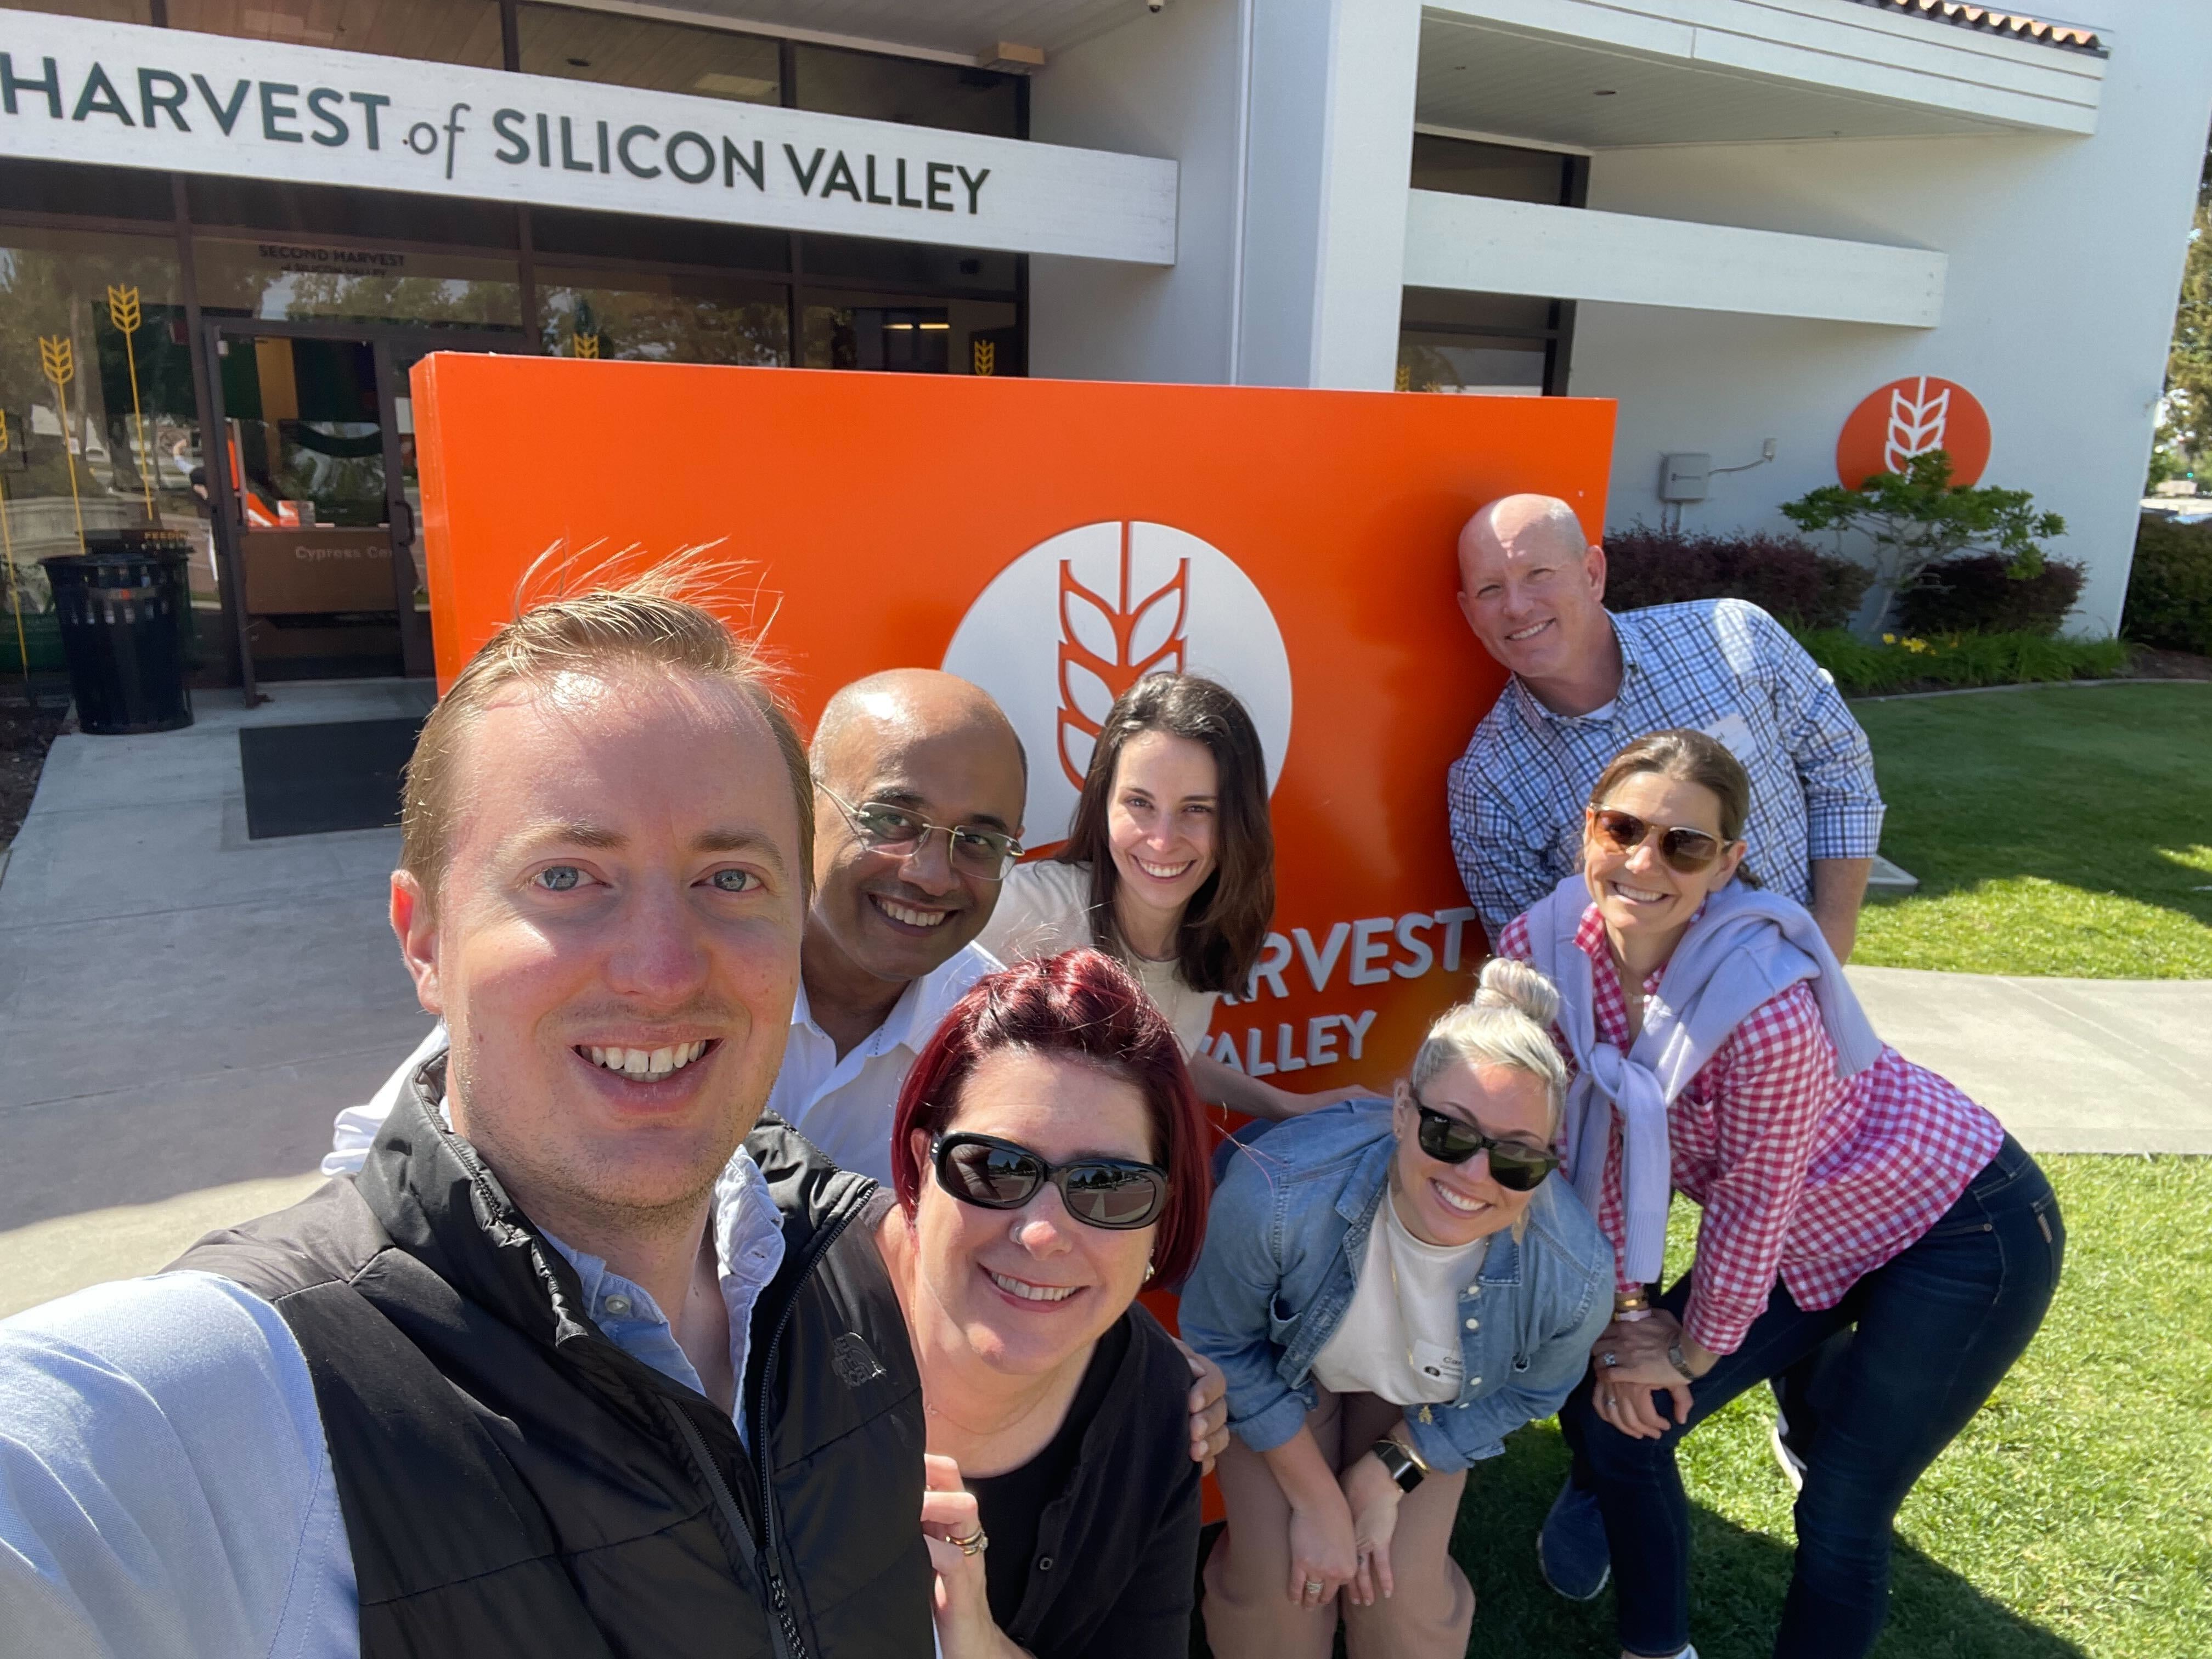 Members of Eightfold AI's team posing for a selfie in front of the sign of Second Harvest of Silicon Valley.